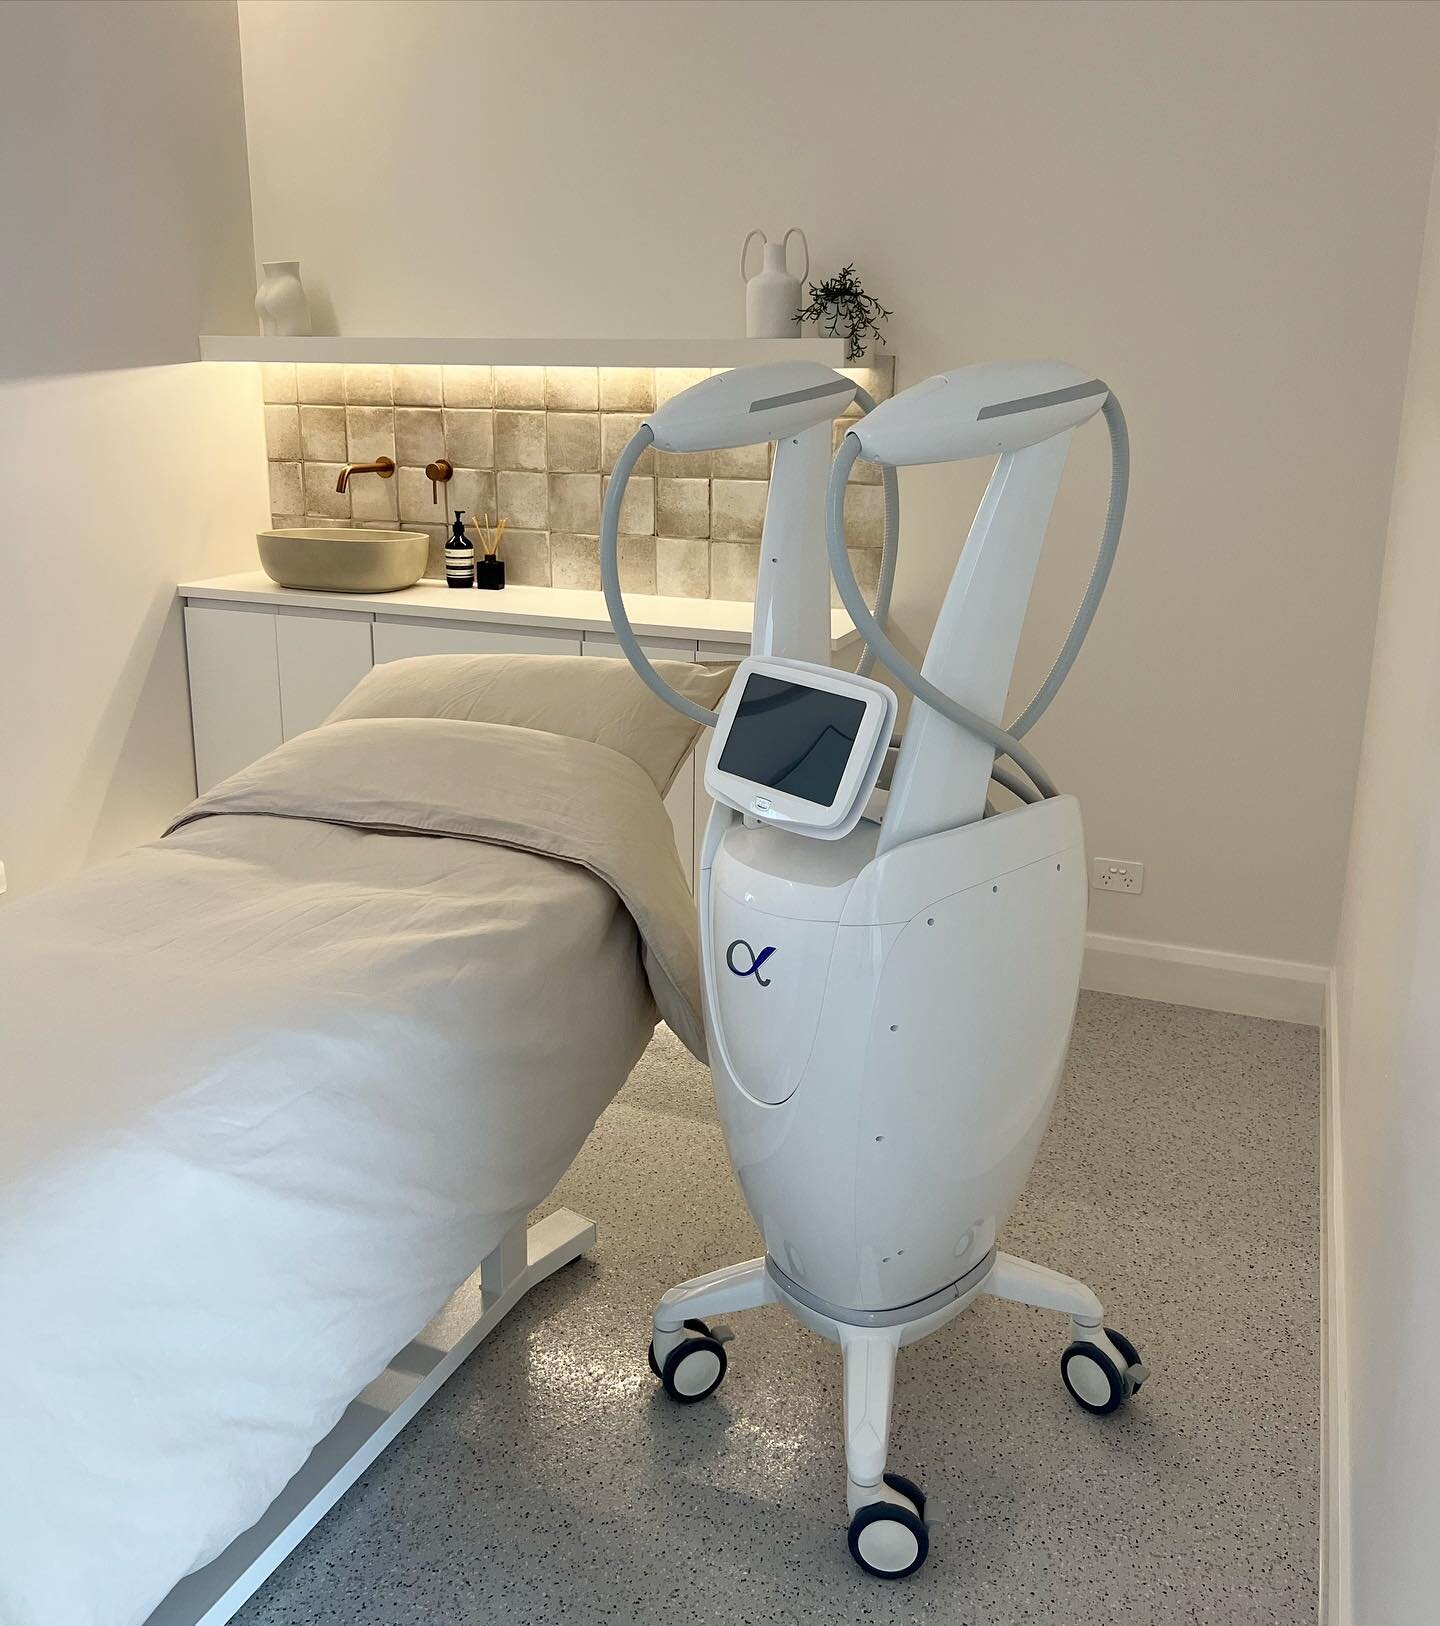 Cryolipolysis (Fat Freezing) is a treatment for all shapes and sizes, it doesn&rsquo;t discriminate!
This treatment not only assists in removing larger stubborn pockets of fat but can also be used to contour and shape smaller areas of the body. 

Whe